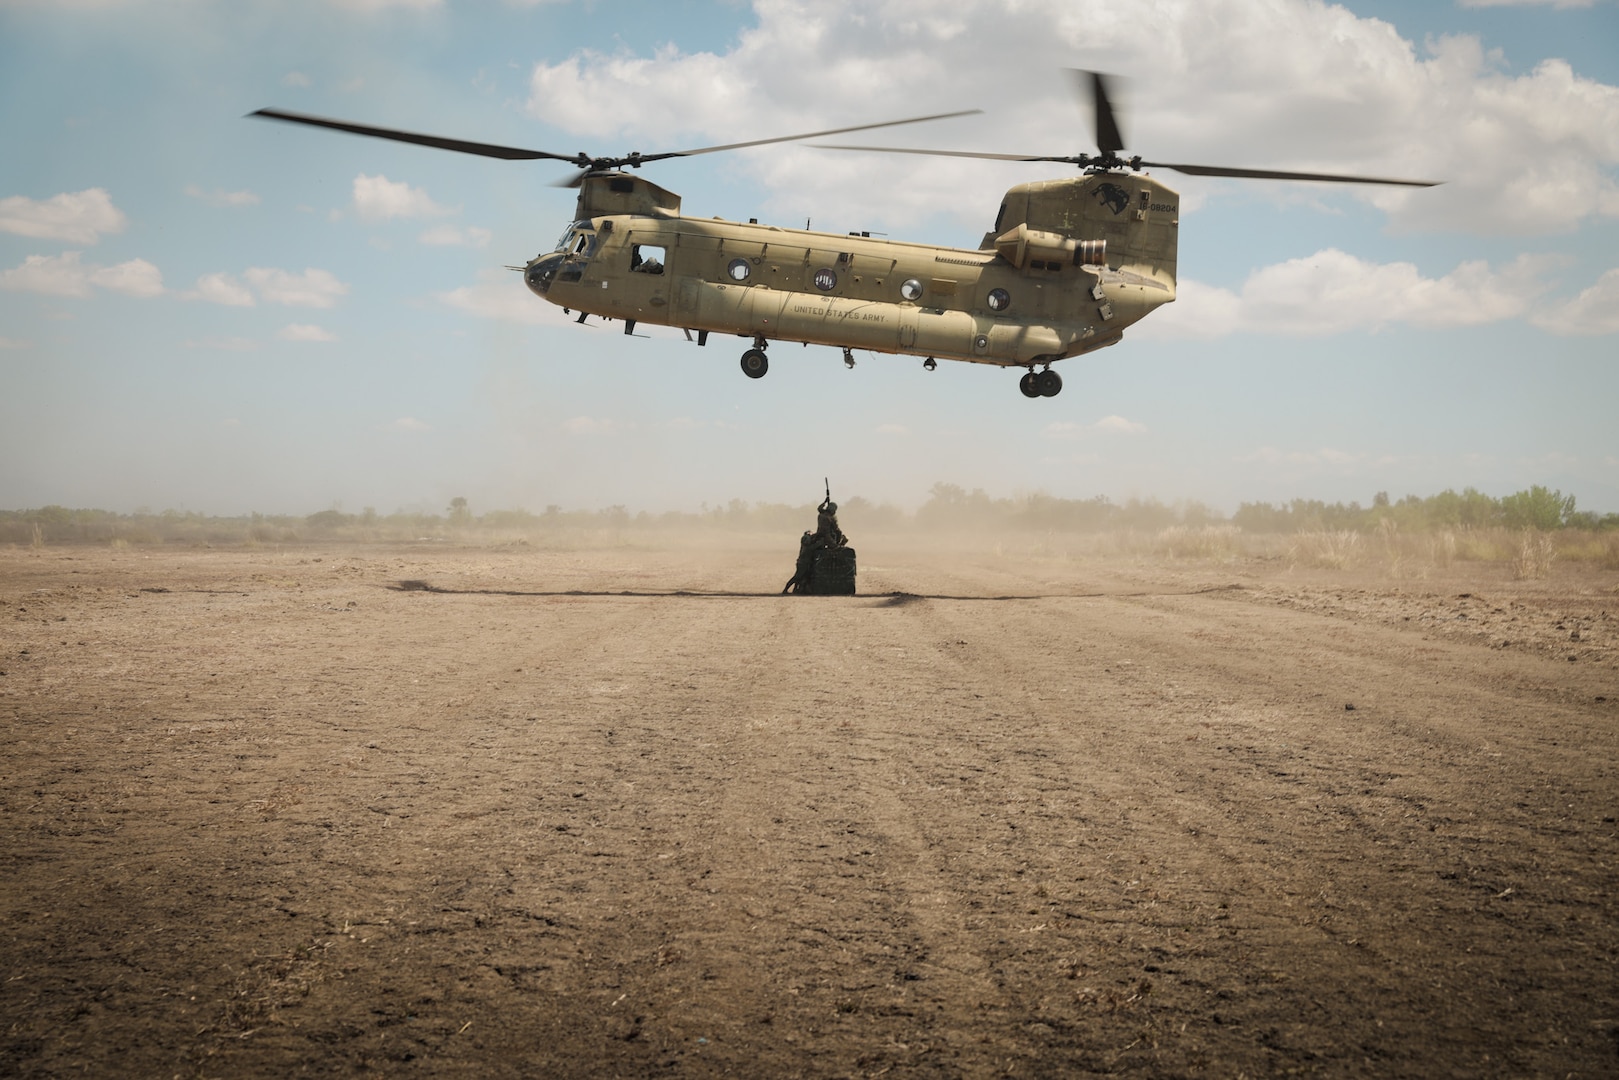 U.S. Army Soldiers assigned to the 25th Infantry Division Sustainment Brigade, 25th Infantry Division alongside Philippine Army Soldiers assigned to 7th Service Support Battalion, Army Support Command, and Special Forces Regiment Airborne conduct sling load training using A22 cargo bags with a CH-47 Chinook helicopter from the 25th Combat Aviation Brigade, 25th Infantry Division in support of Exercise Balikatan 24 at Fort Magsaysay, Philippines, April 22, 2024. BK 24 is an annual exercise between the Armed Forces of the Philippines and the U.S. military designed to strengthen bilateral interoperability, capabilities, trust, and cooperation built over decades of shared experiences. (U.S. Army Photo by Spc. Kai Rodriguez, 28th Public Affairs Detachment)